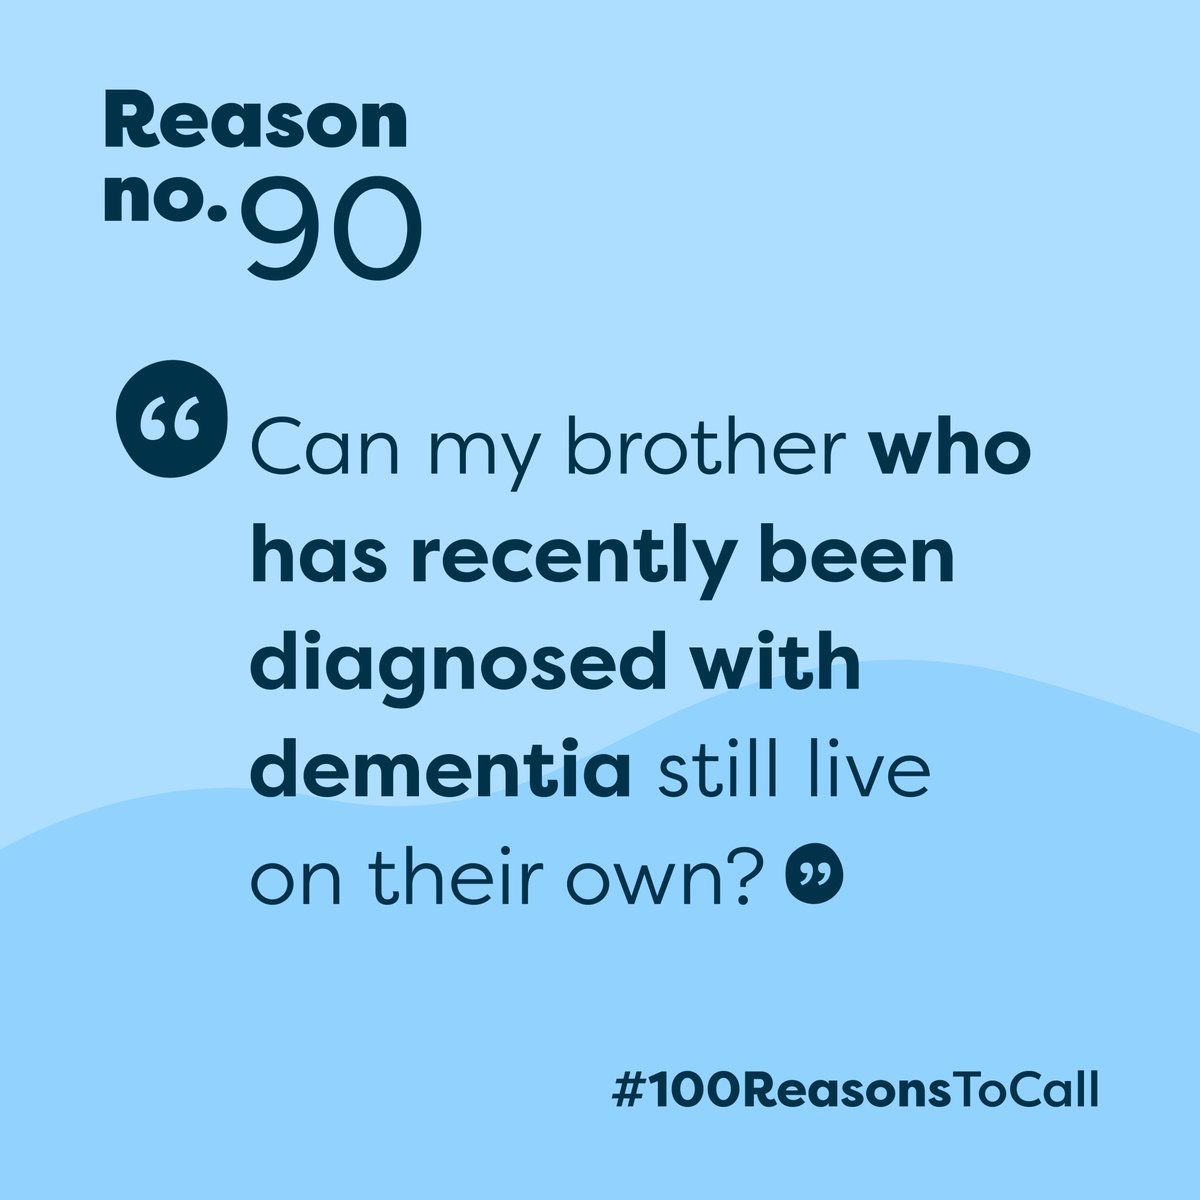 A diagnosis of dementia does not automatically mean that people are immediately incapable of caring for themselves. The type of support needed depends on the individual situation. For advice or support call the National Dementia Helpline anytime on 1800 100 500 #100ReasonsToCall